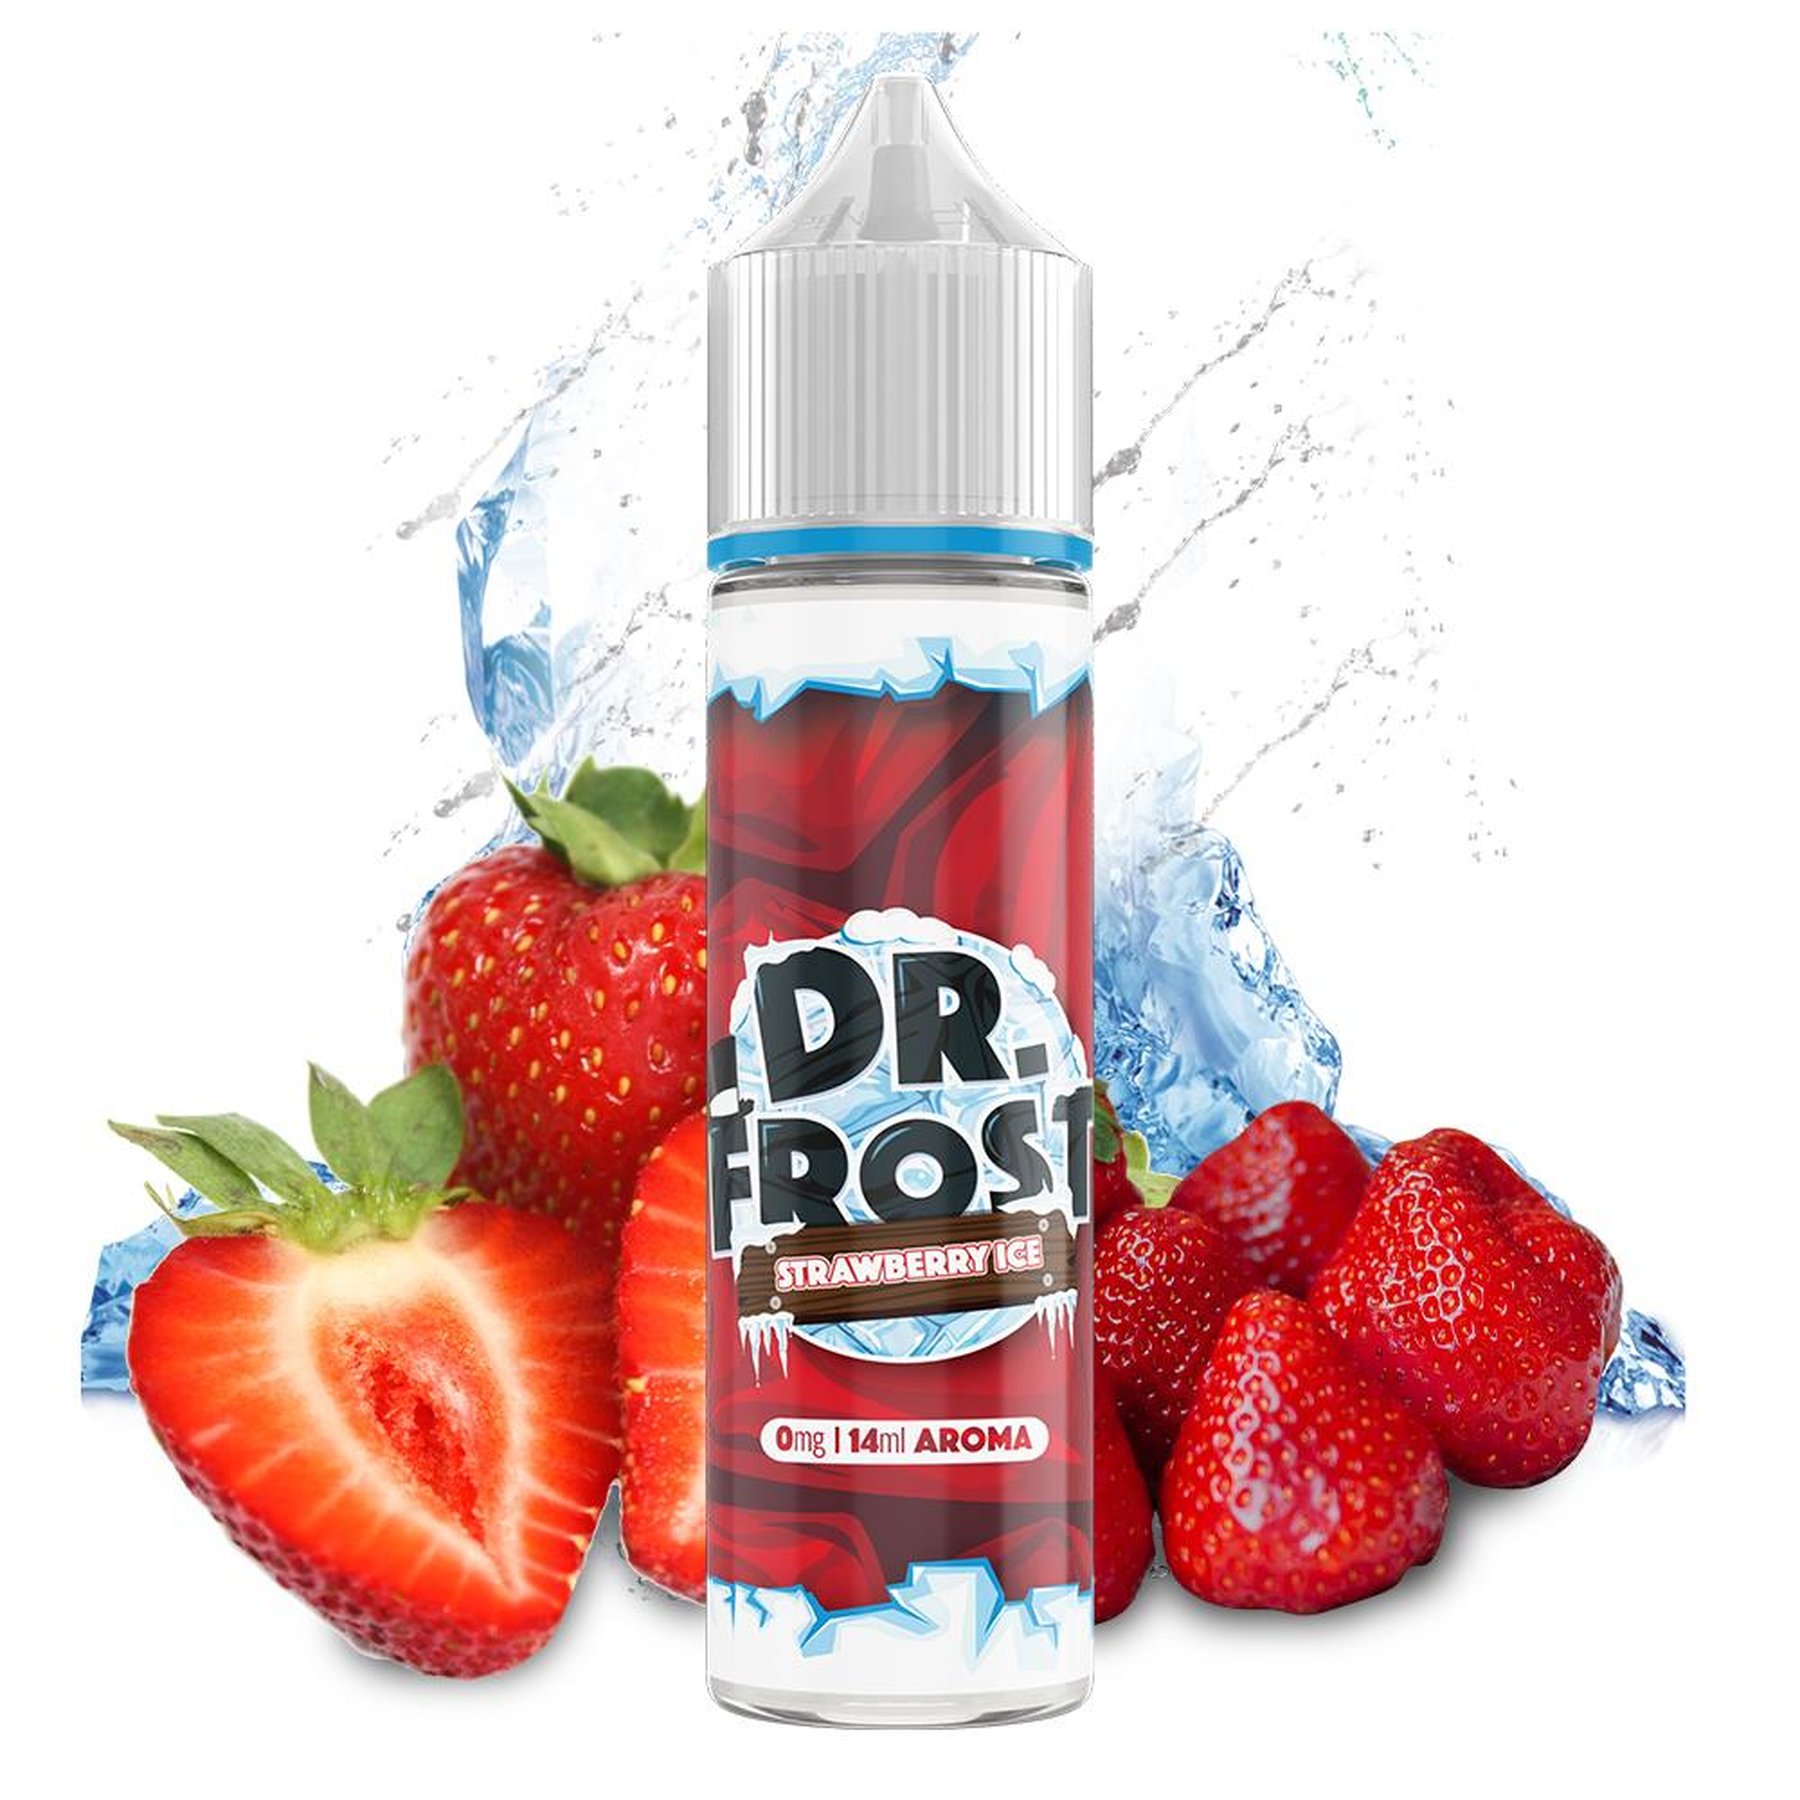 Dr. Frost Strawberry Ice Longfill 14ml